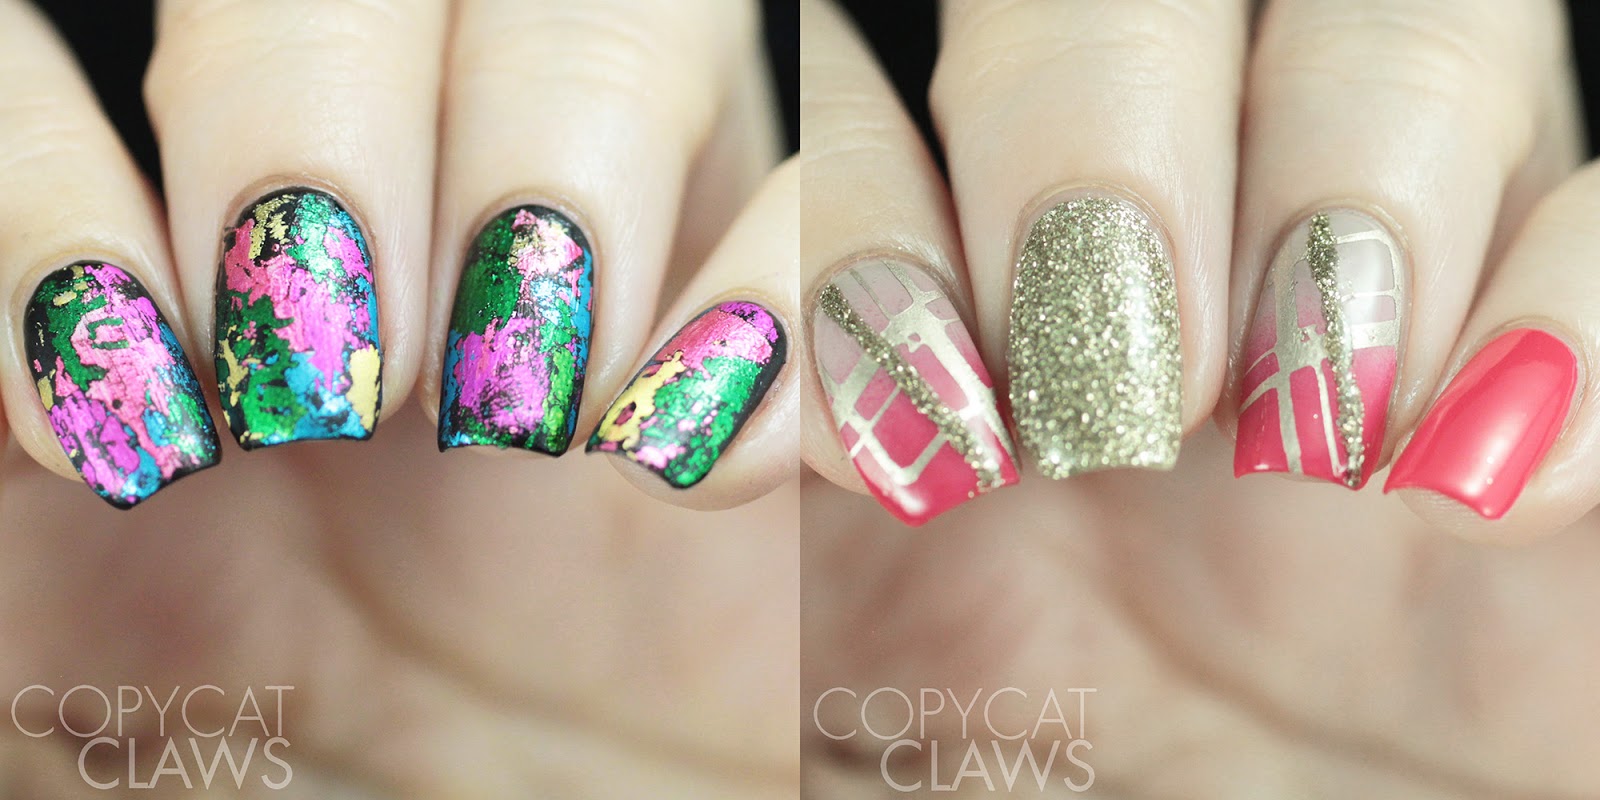 Claws Show Nails - wide 4